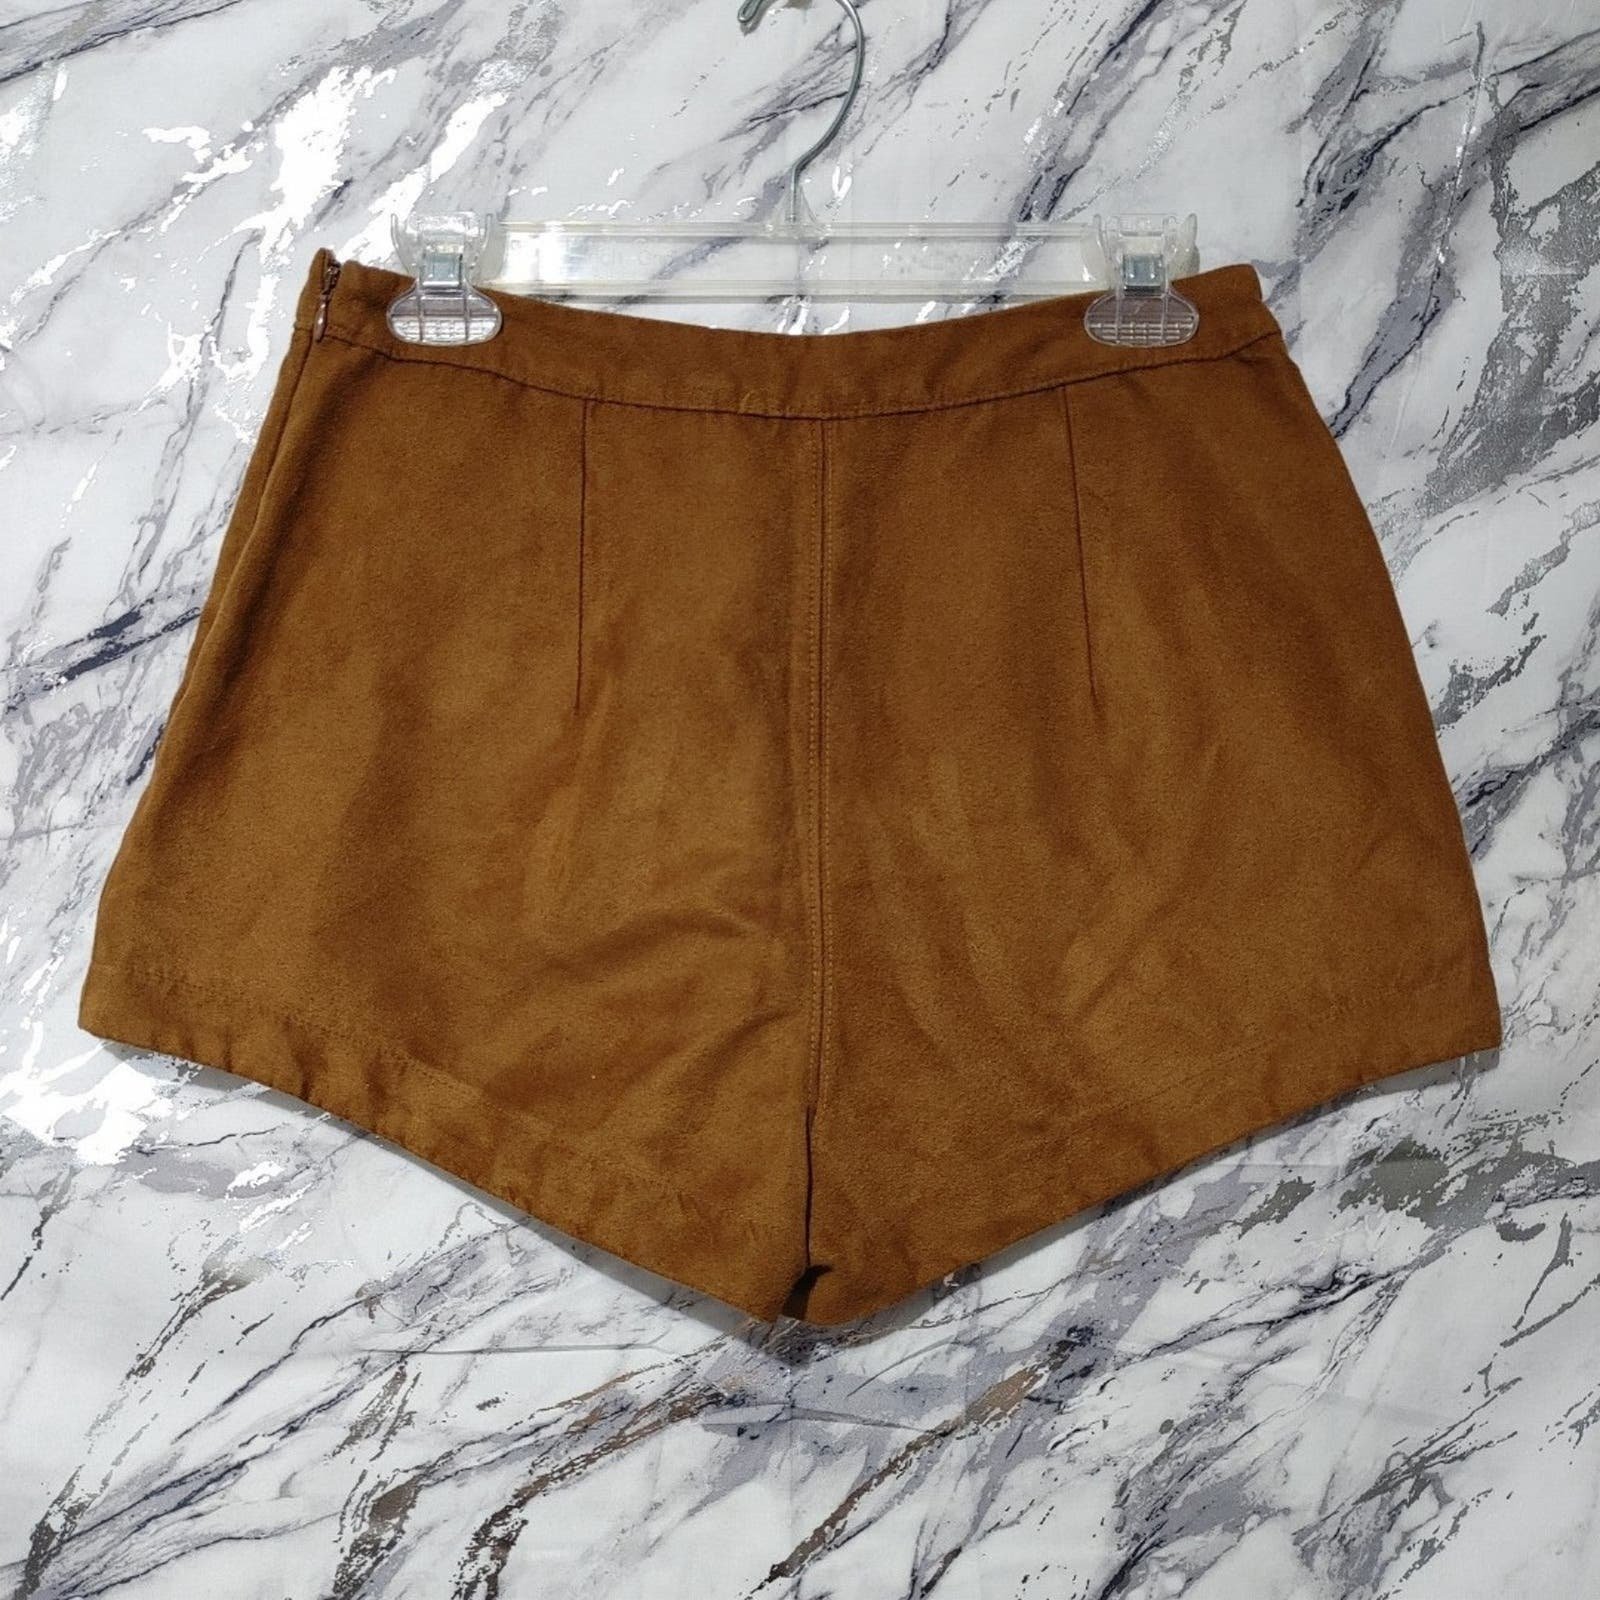 good price Hollister tan faux suede shorts GBq5Pv77O Outlet Store